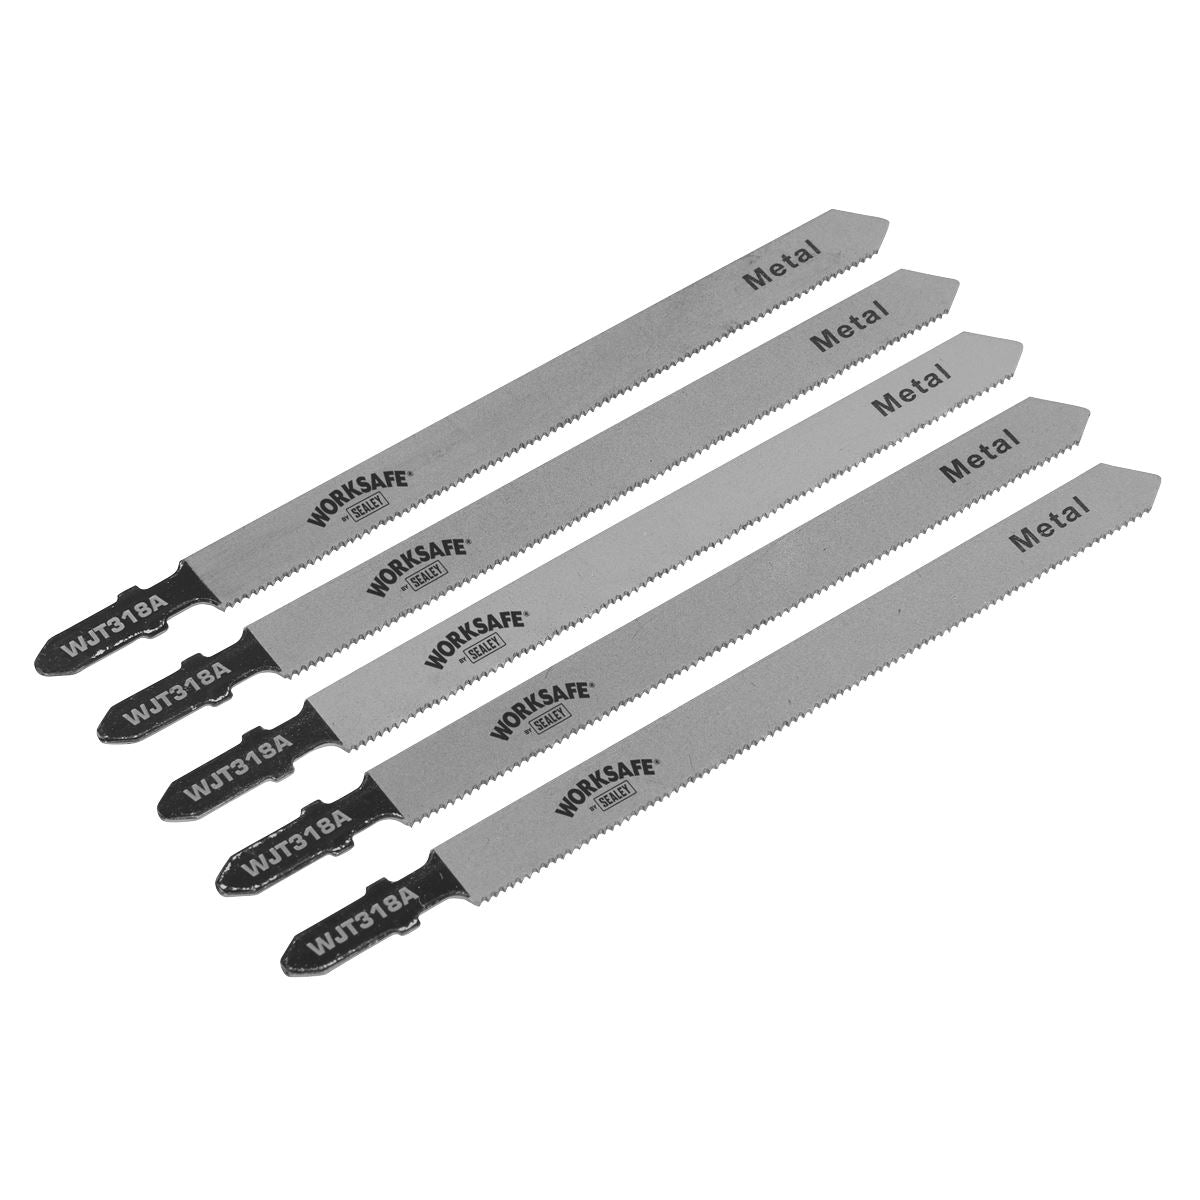 Sealey Jigsaw Blade Metal 105mm 21tpi - Pack of 5